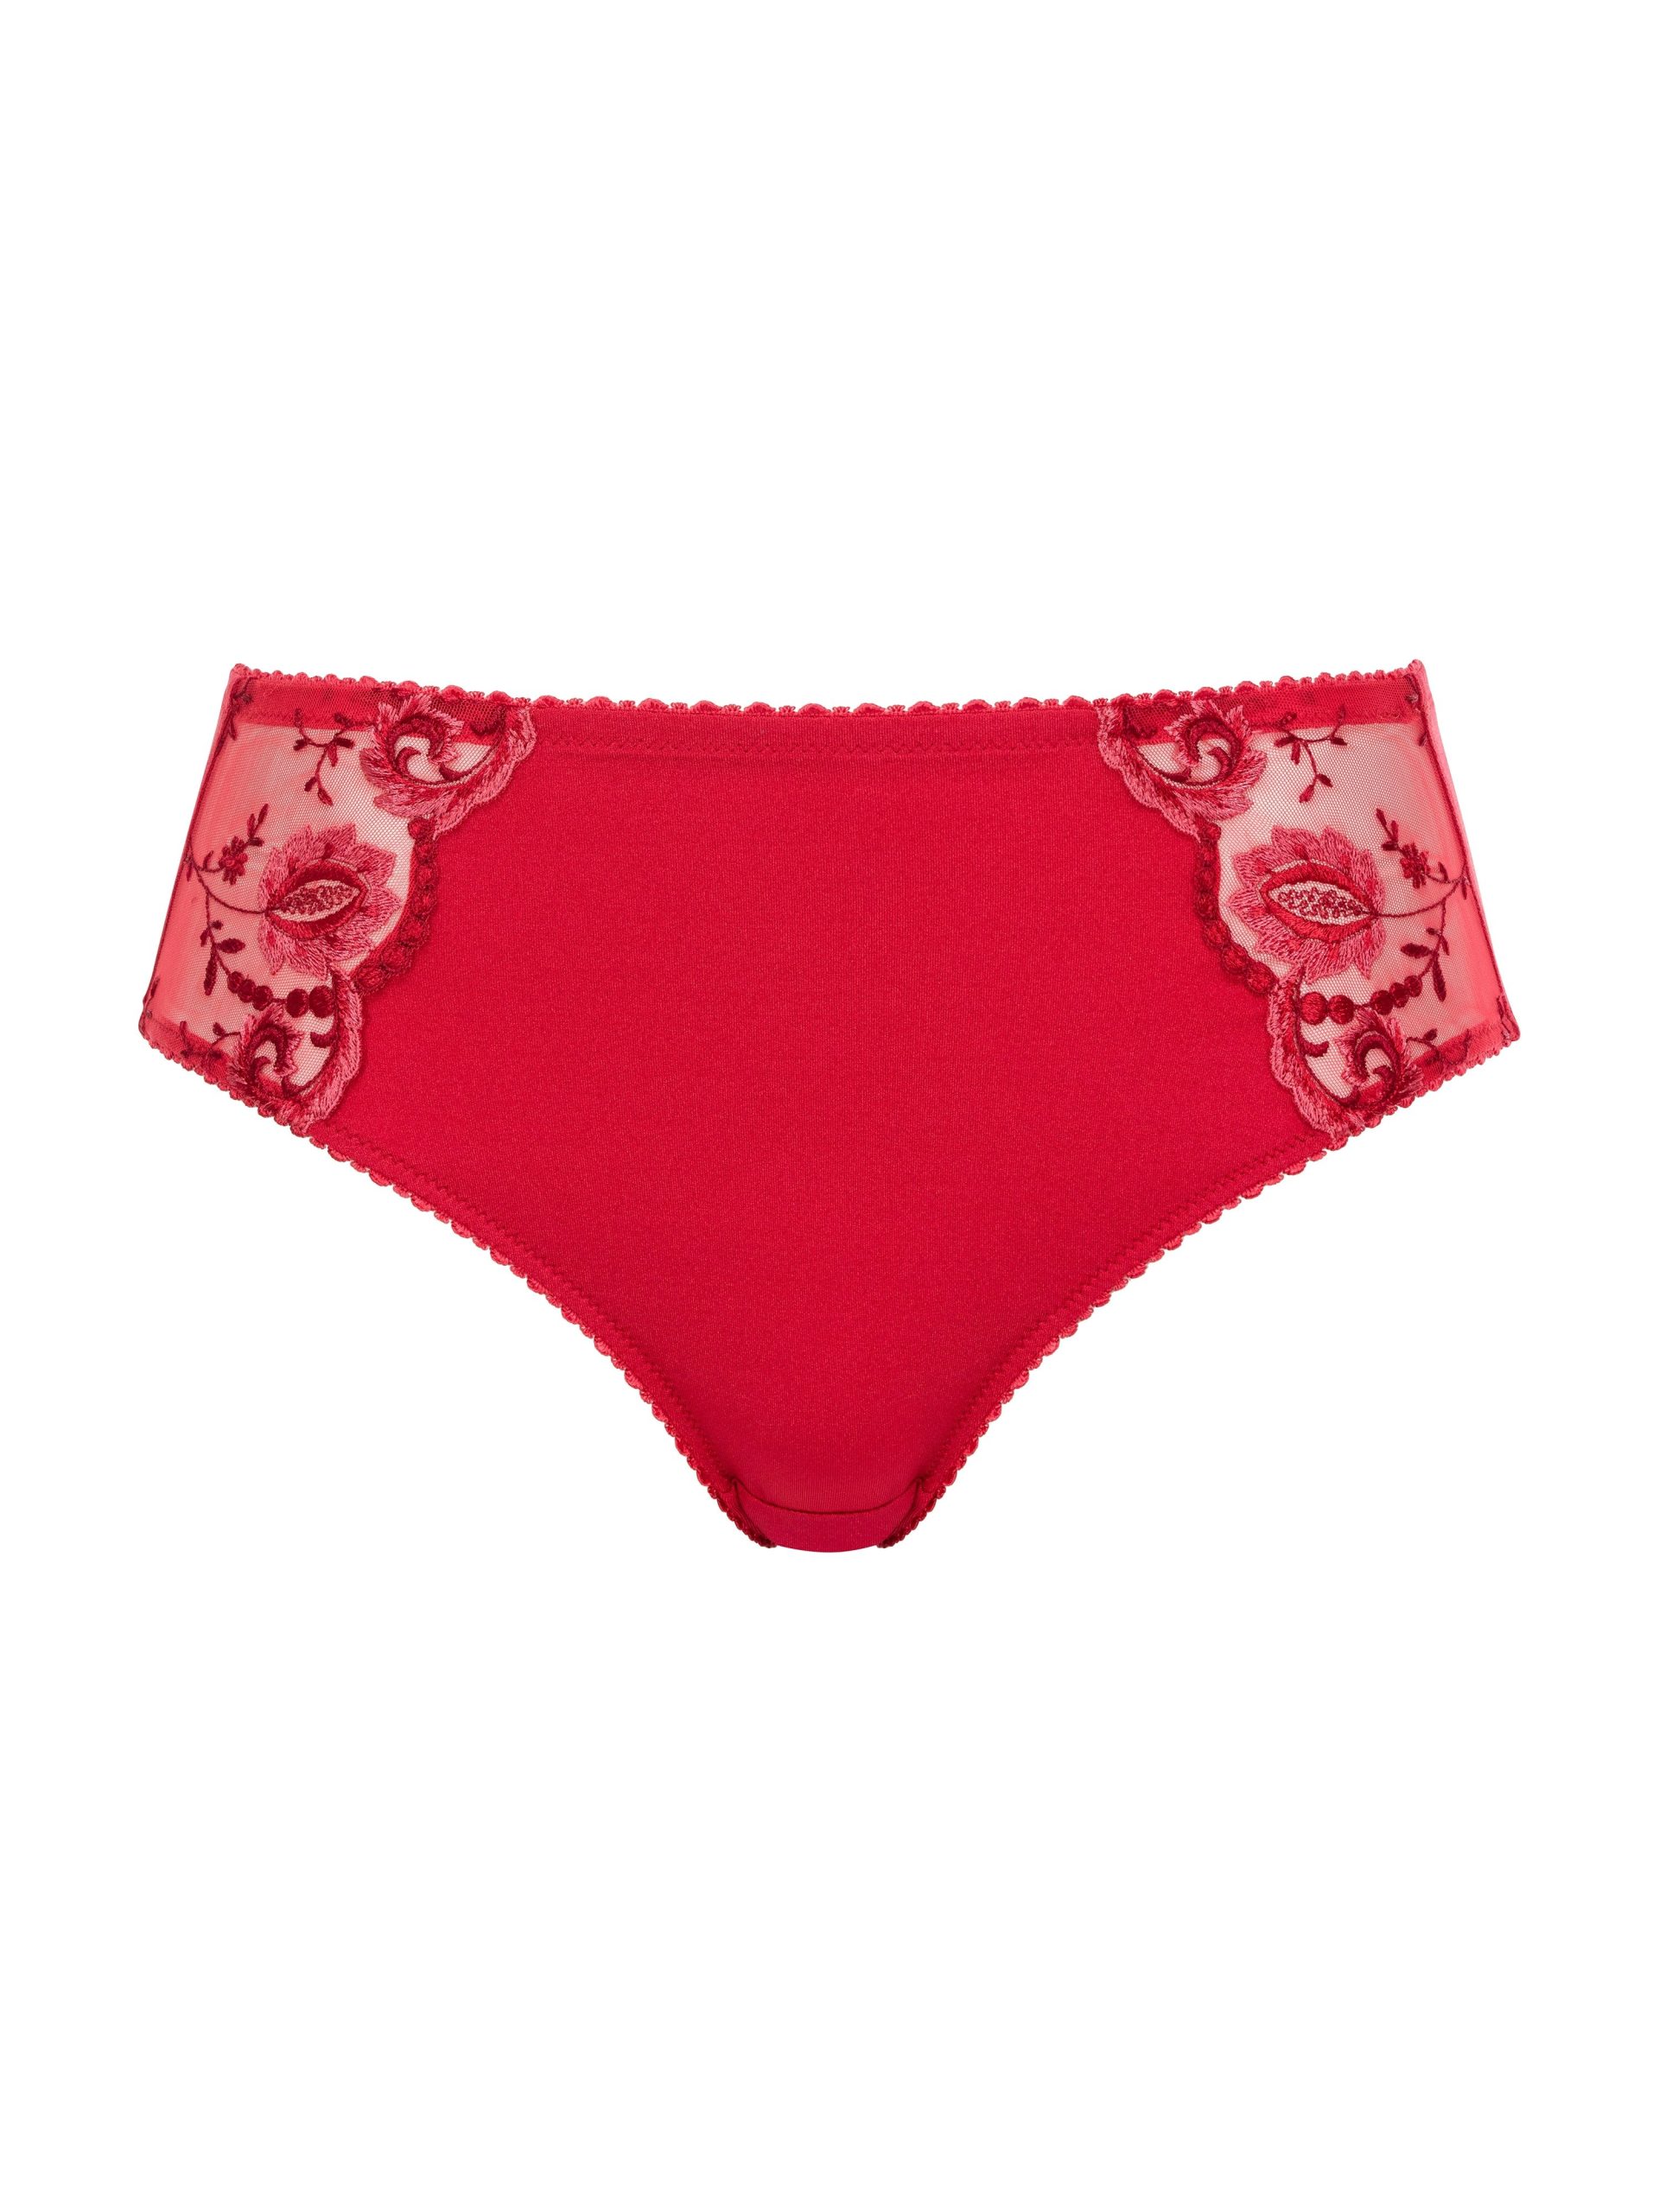 Felina Conturelle Provence brief 546 TANGO RED buy for the best price CAD$  84.00 - Canada and U.S. delivery – Bralissimo